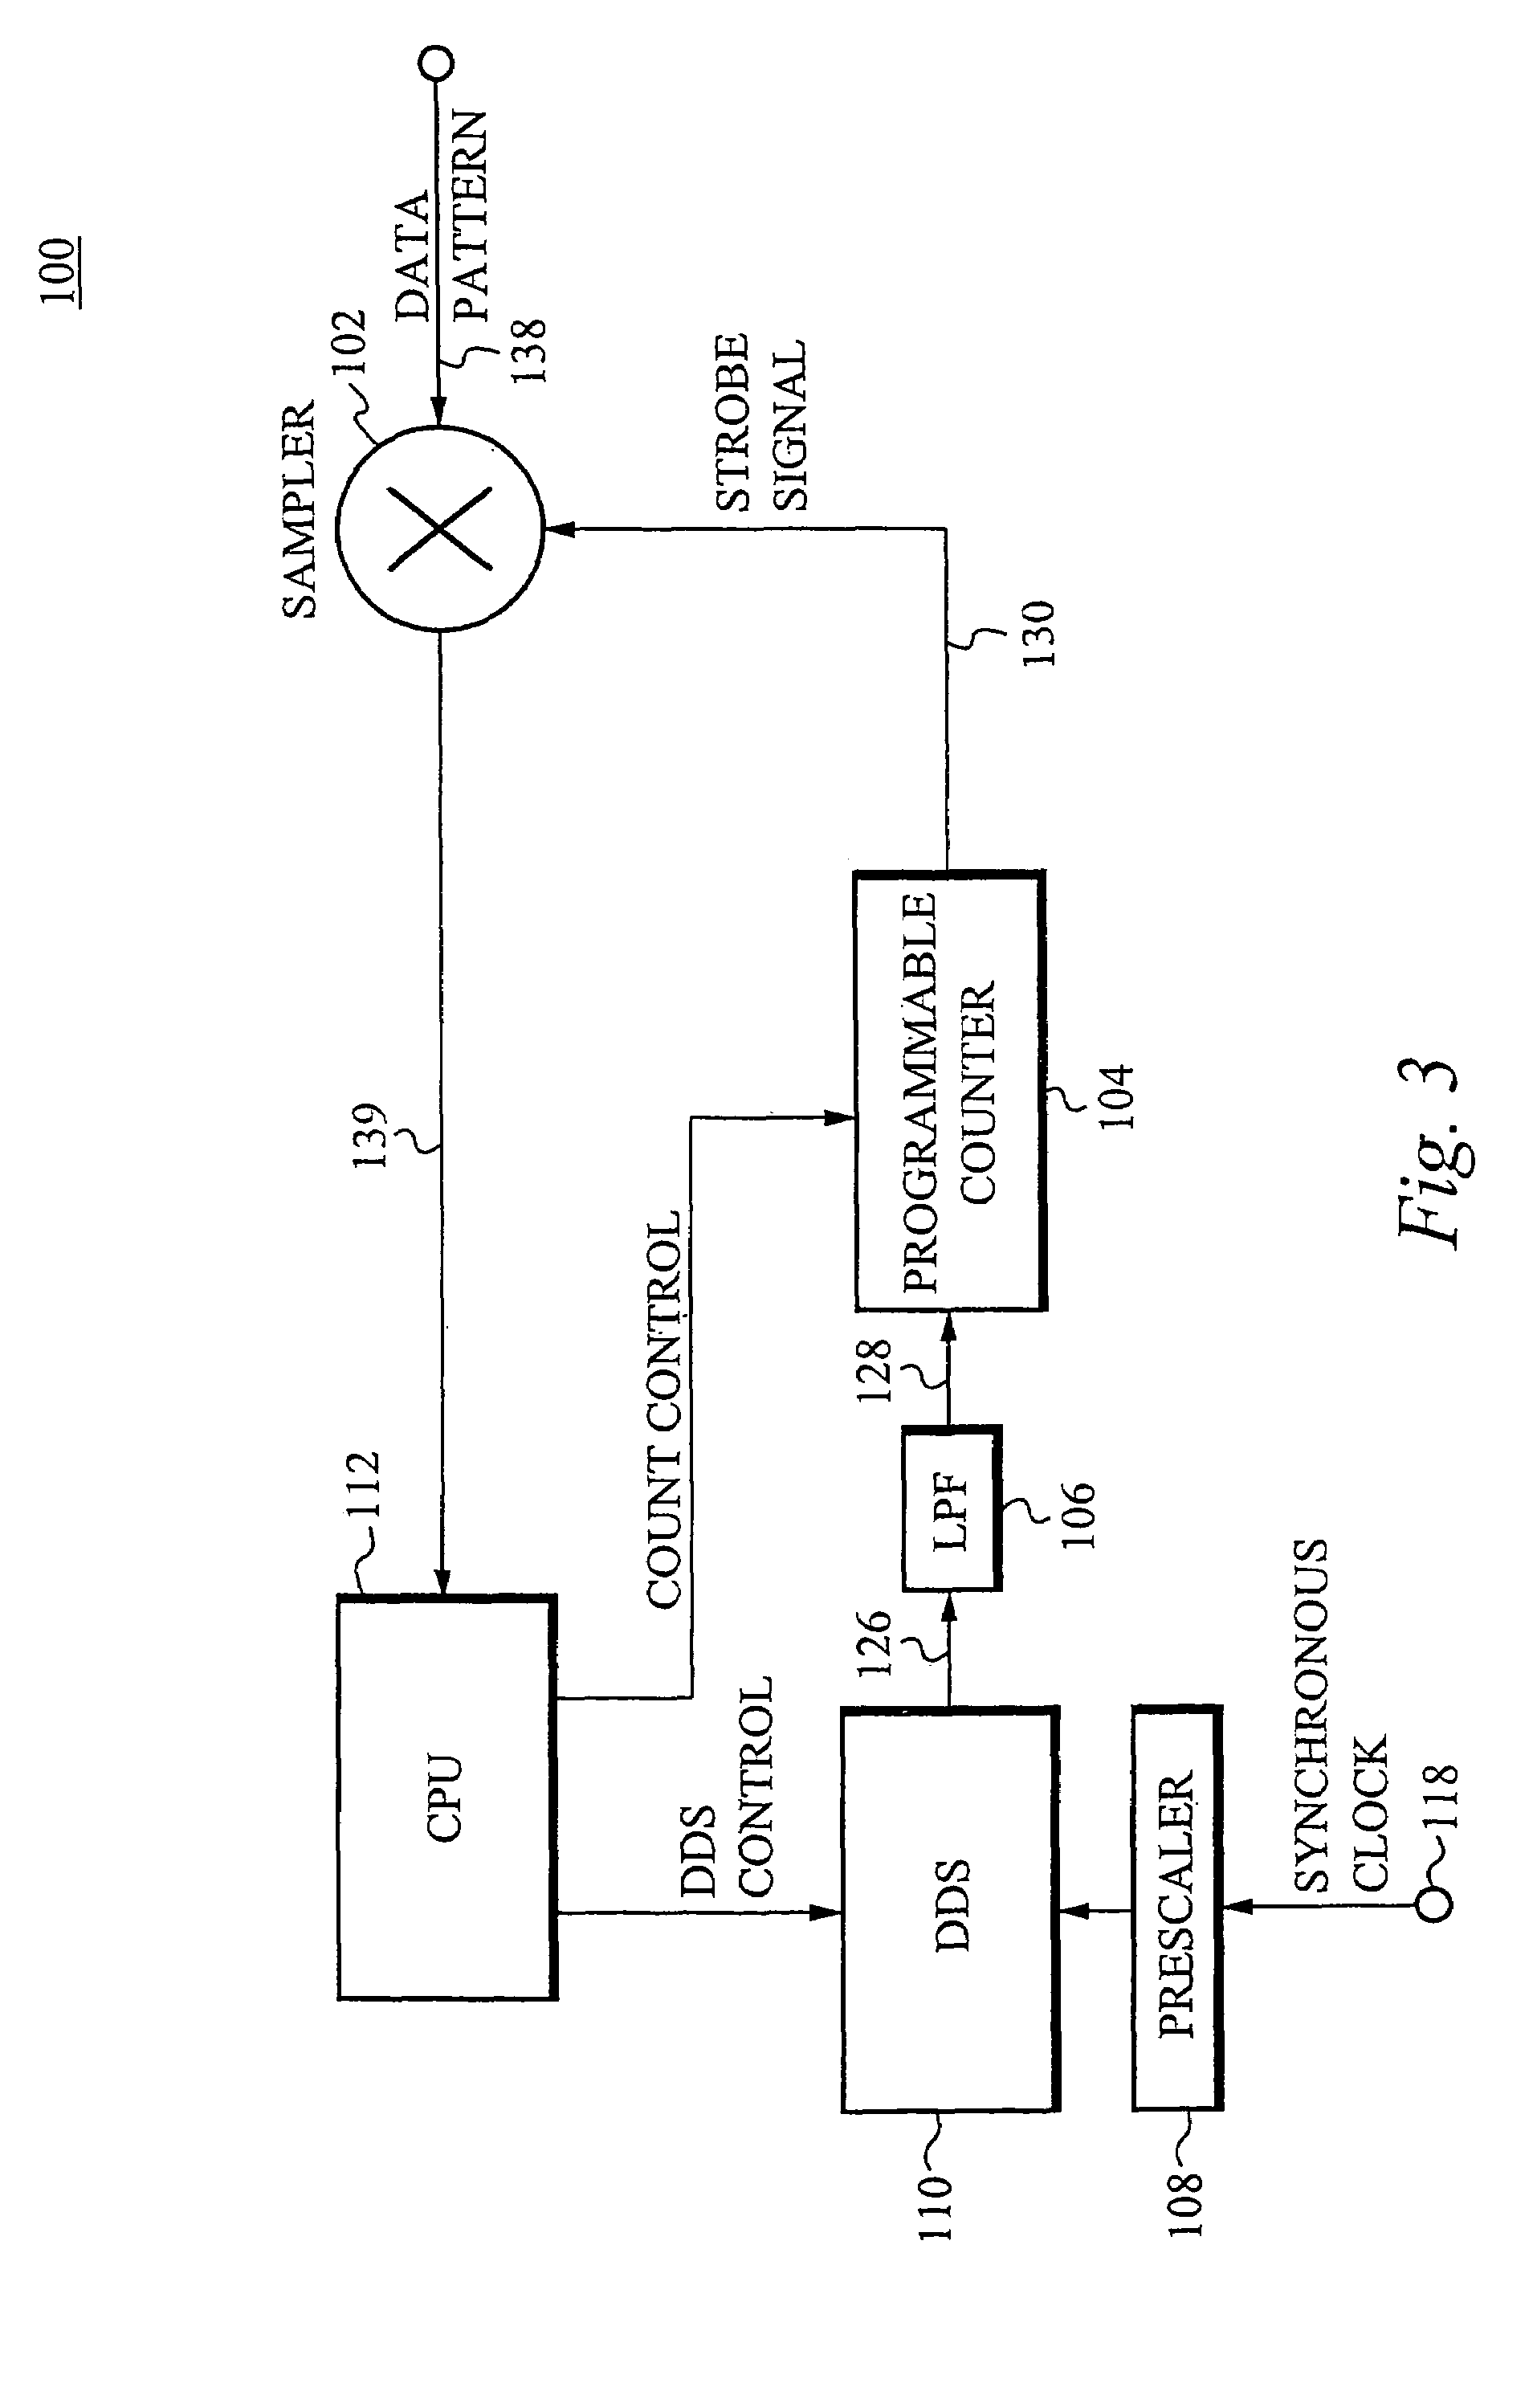 Method of and apparatus for measuring jitter and generating an eye diagram of a high speed data signal